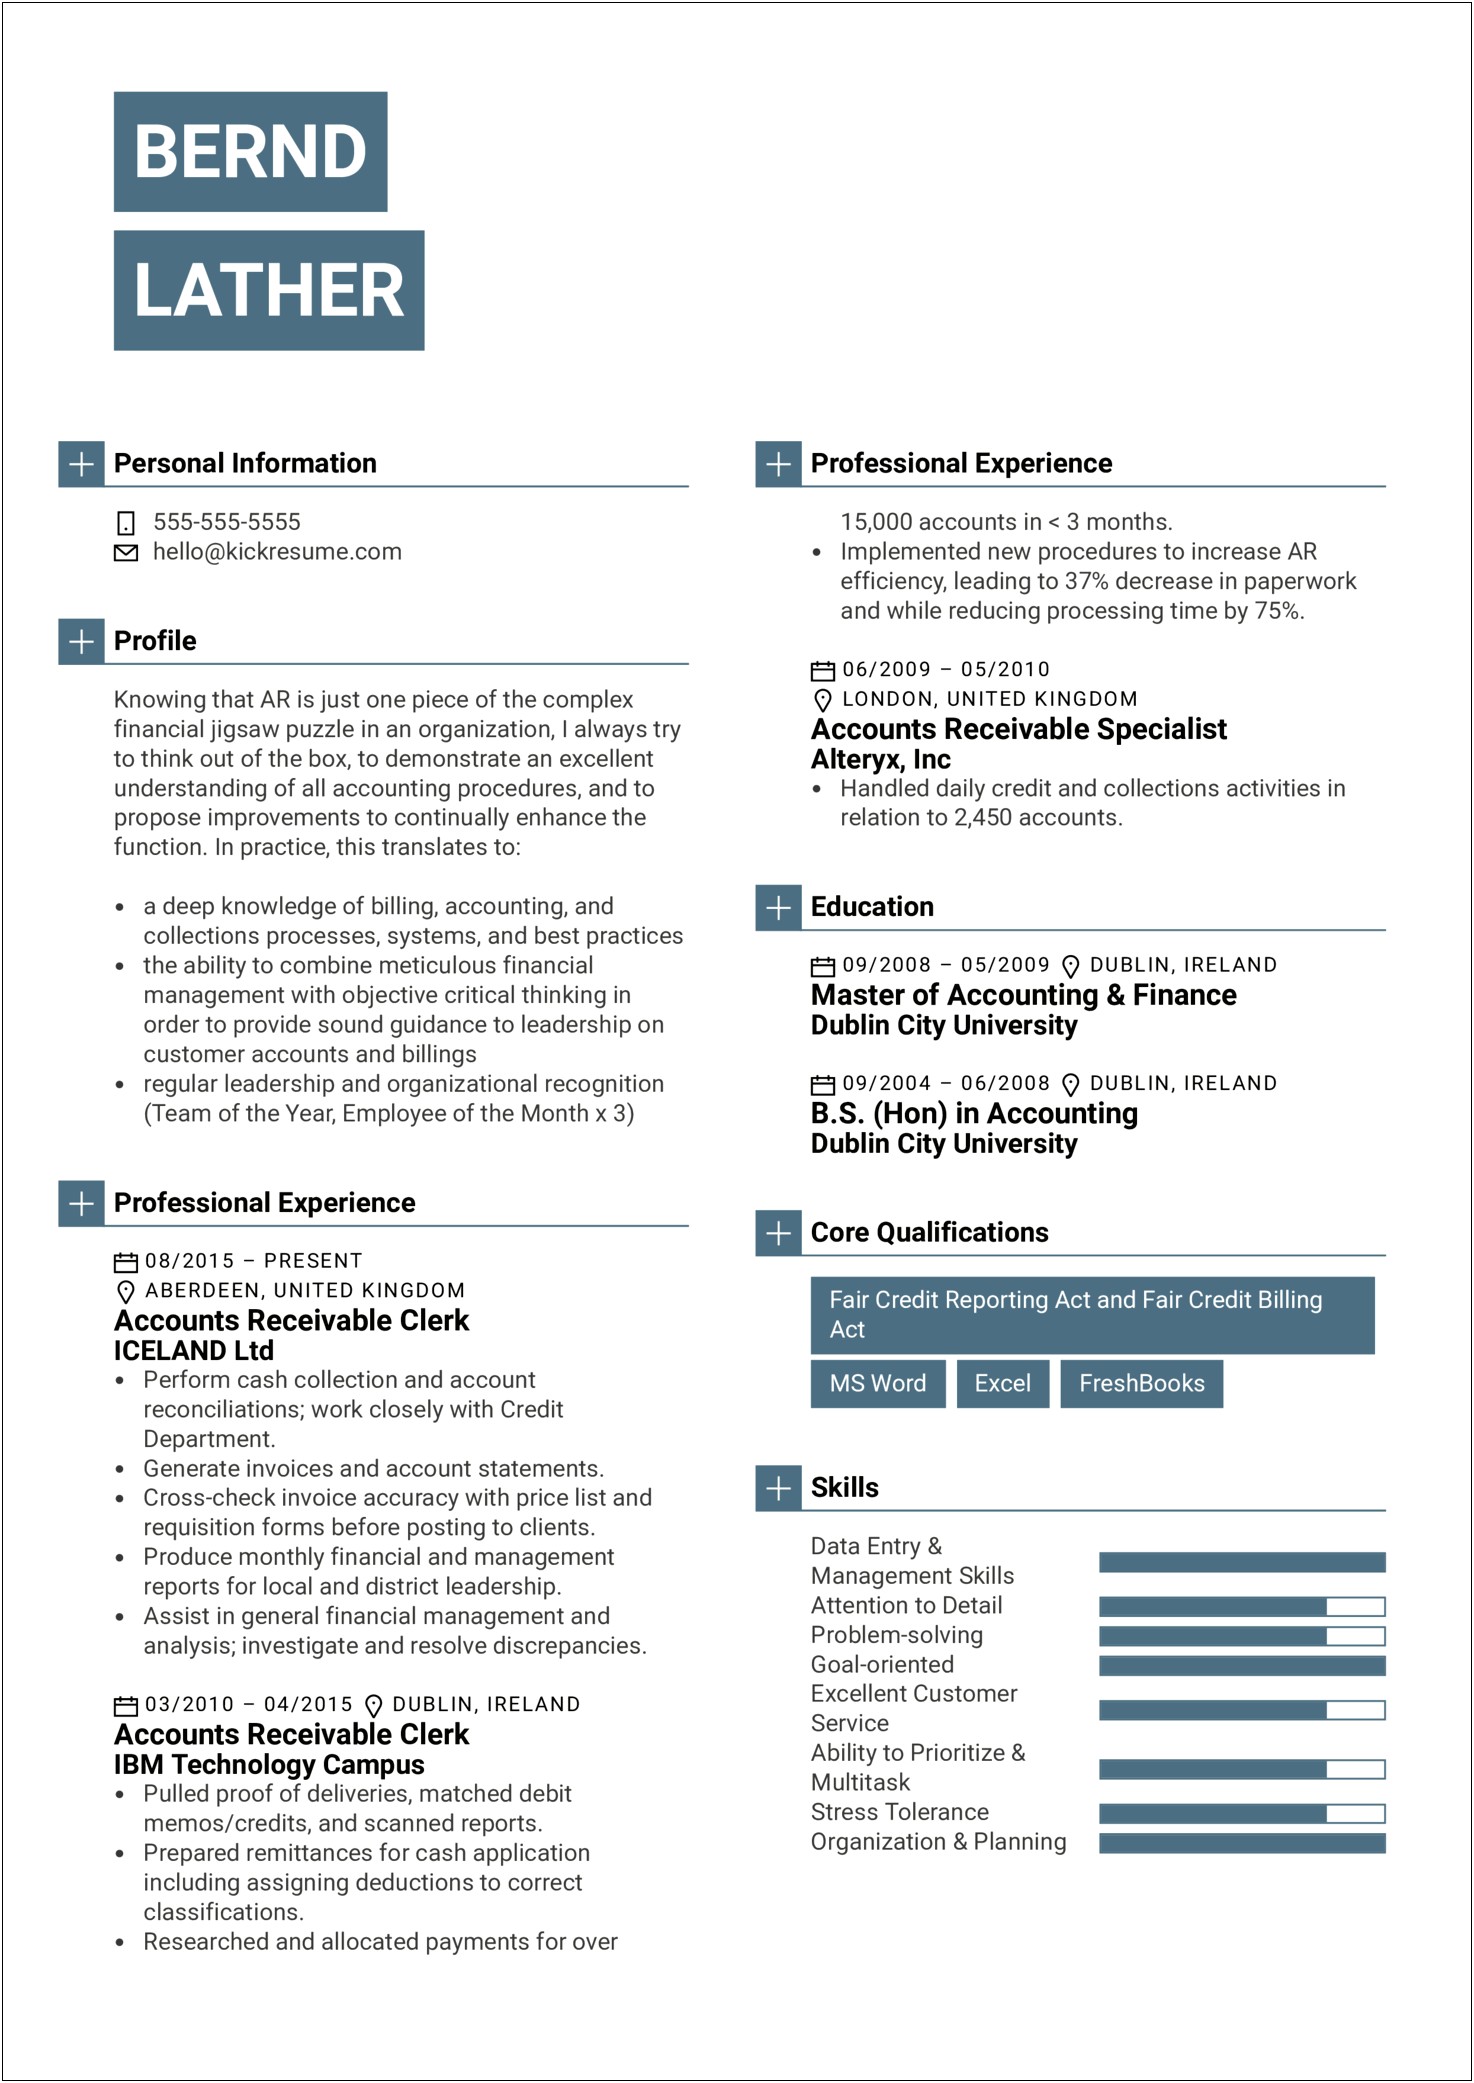 The Best Resumes For Accounting Clerks